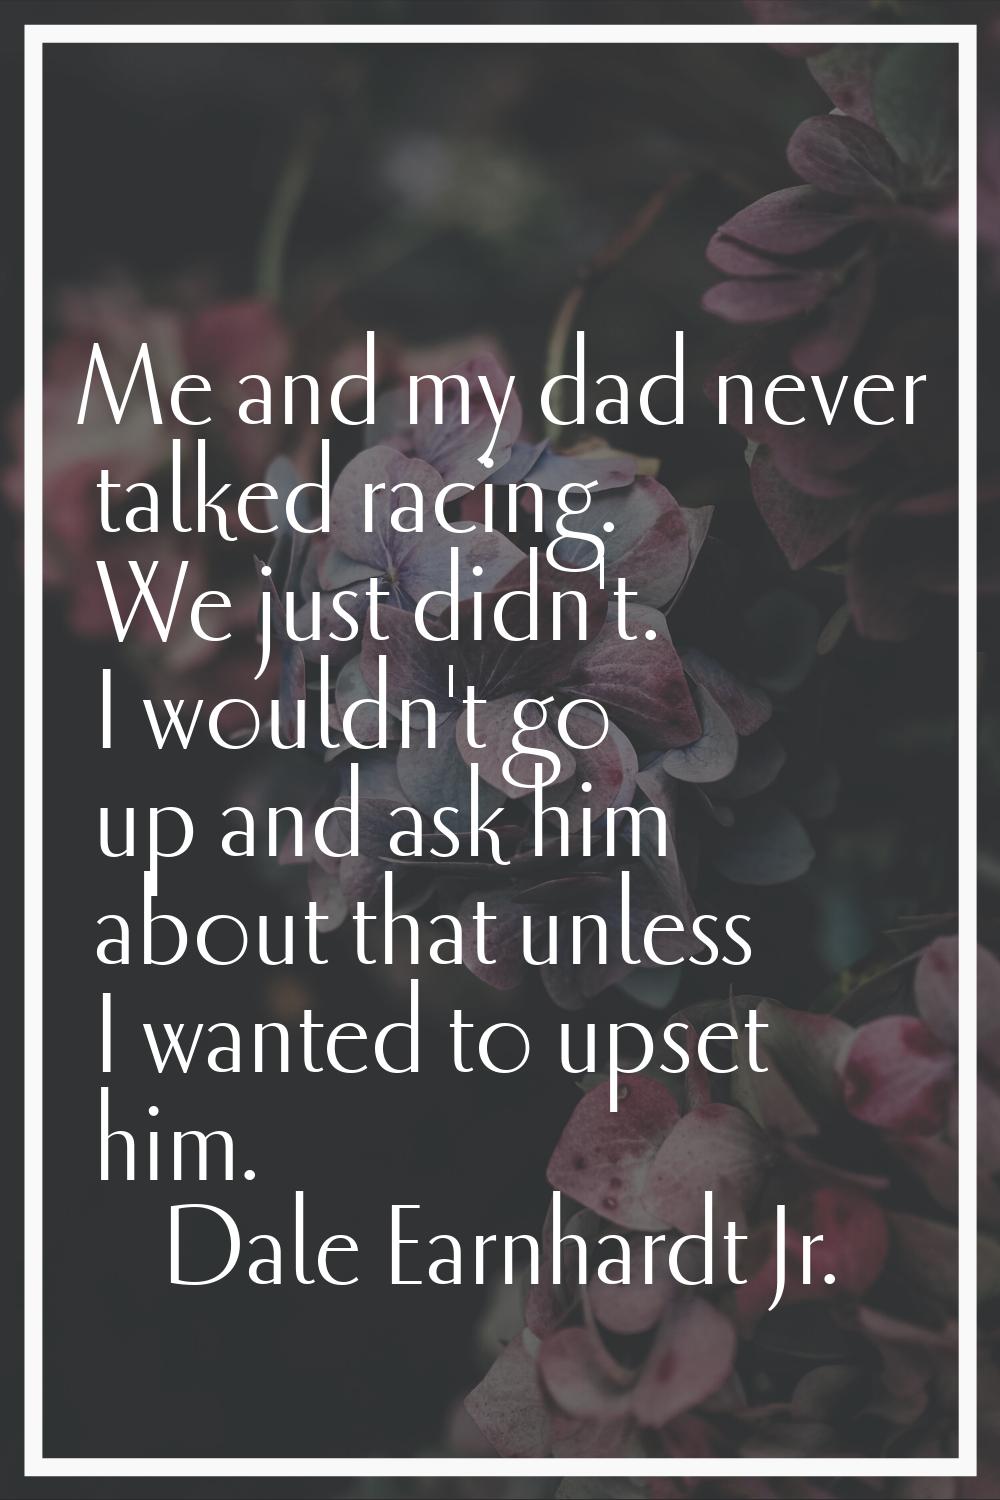 Me and my dad never talked racing. We just didn't. I wouldn't go up and ask him about that unless I